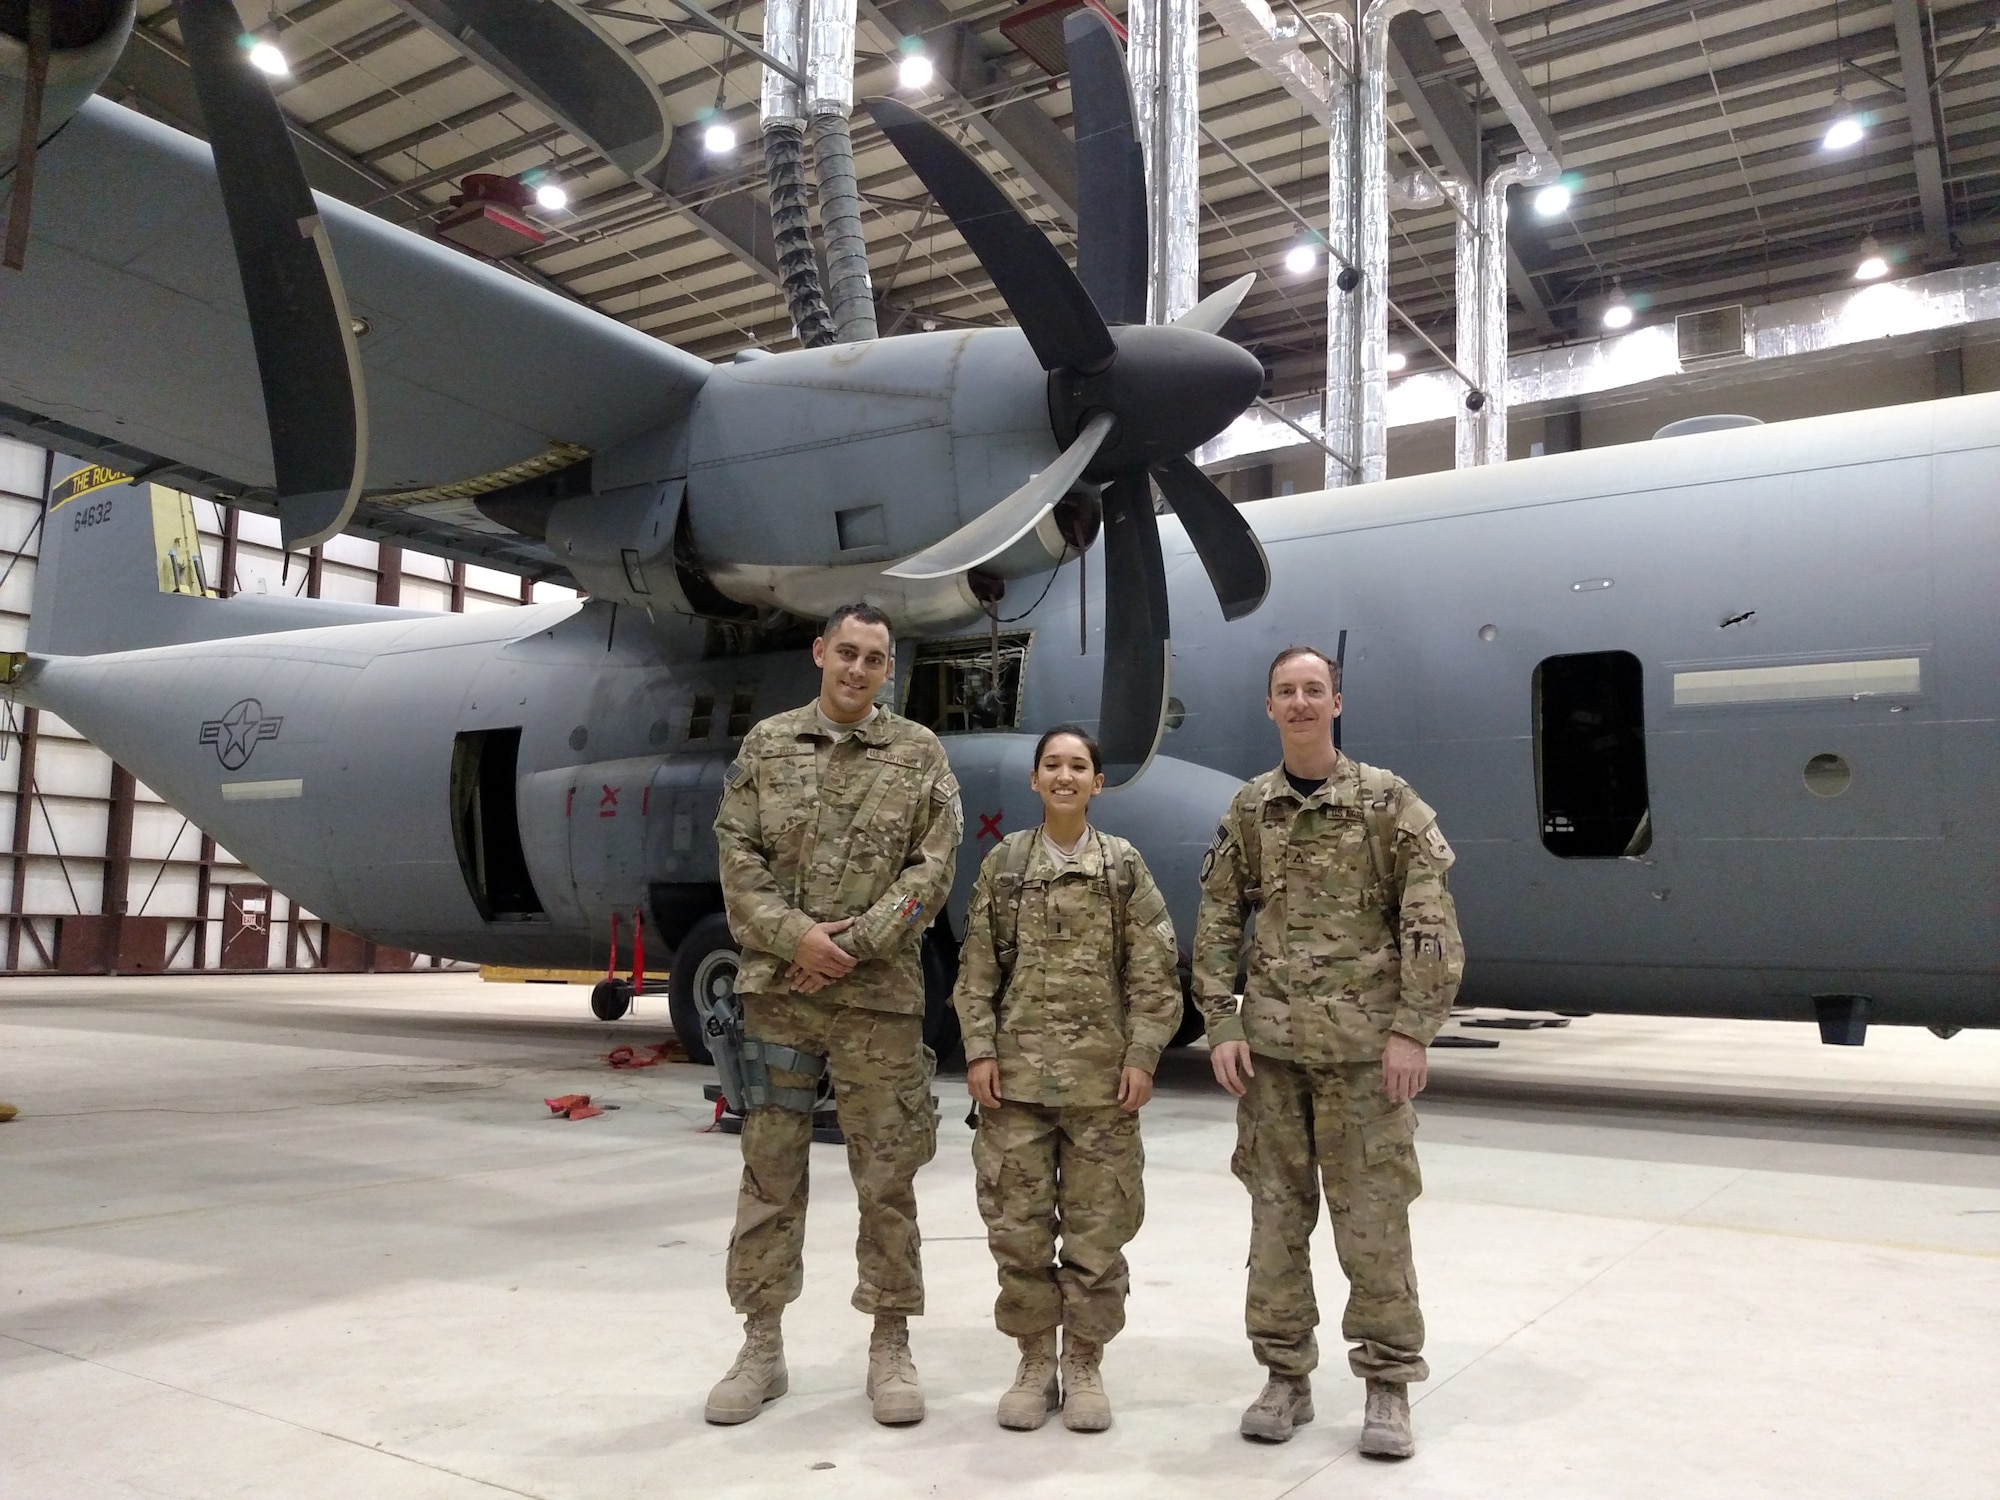 Experts from the Air Force Life Cycle Management Center’s Mobility Directorate pause for a break. The team was deployed to Afghanistan to help repair a C-130J aircraft that had been severely damaged by enemy fire. From left, Tech. Sgt. Nicholas Ellis, 1st Lt. Alexis Sanchez and Joel Lechene. (Courtesy photo)